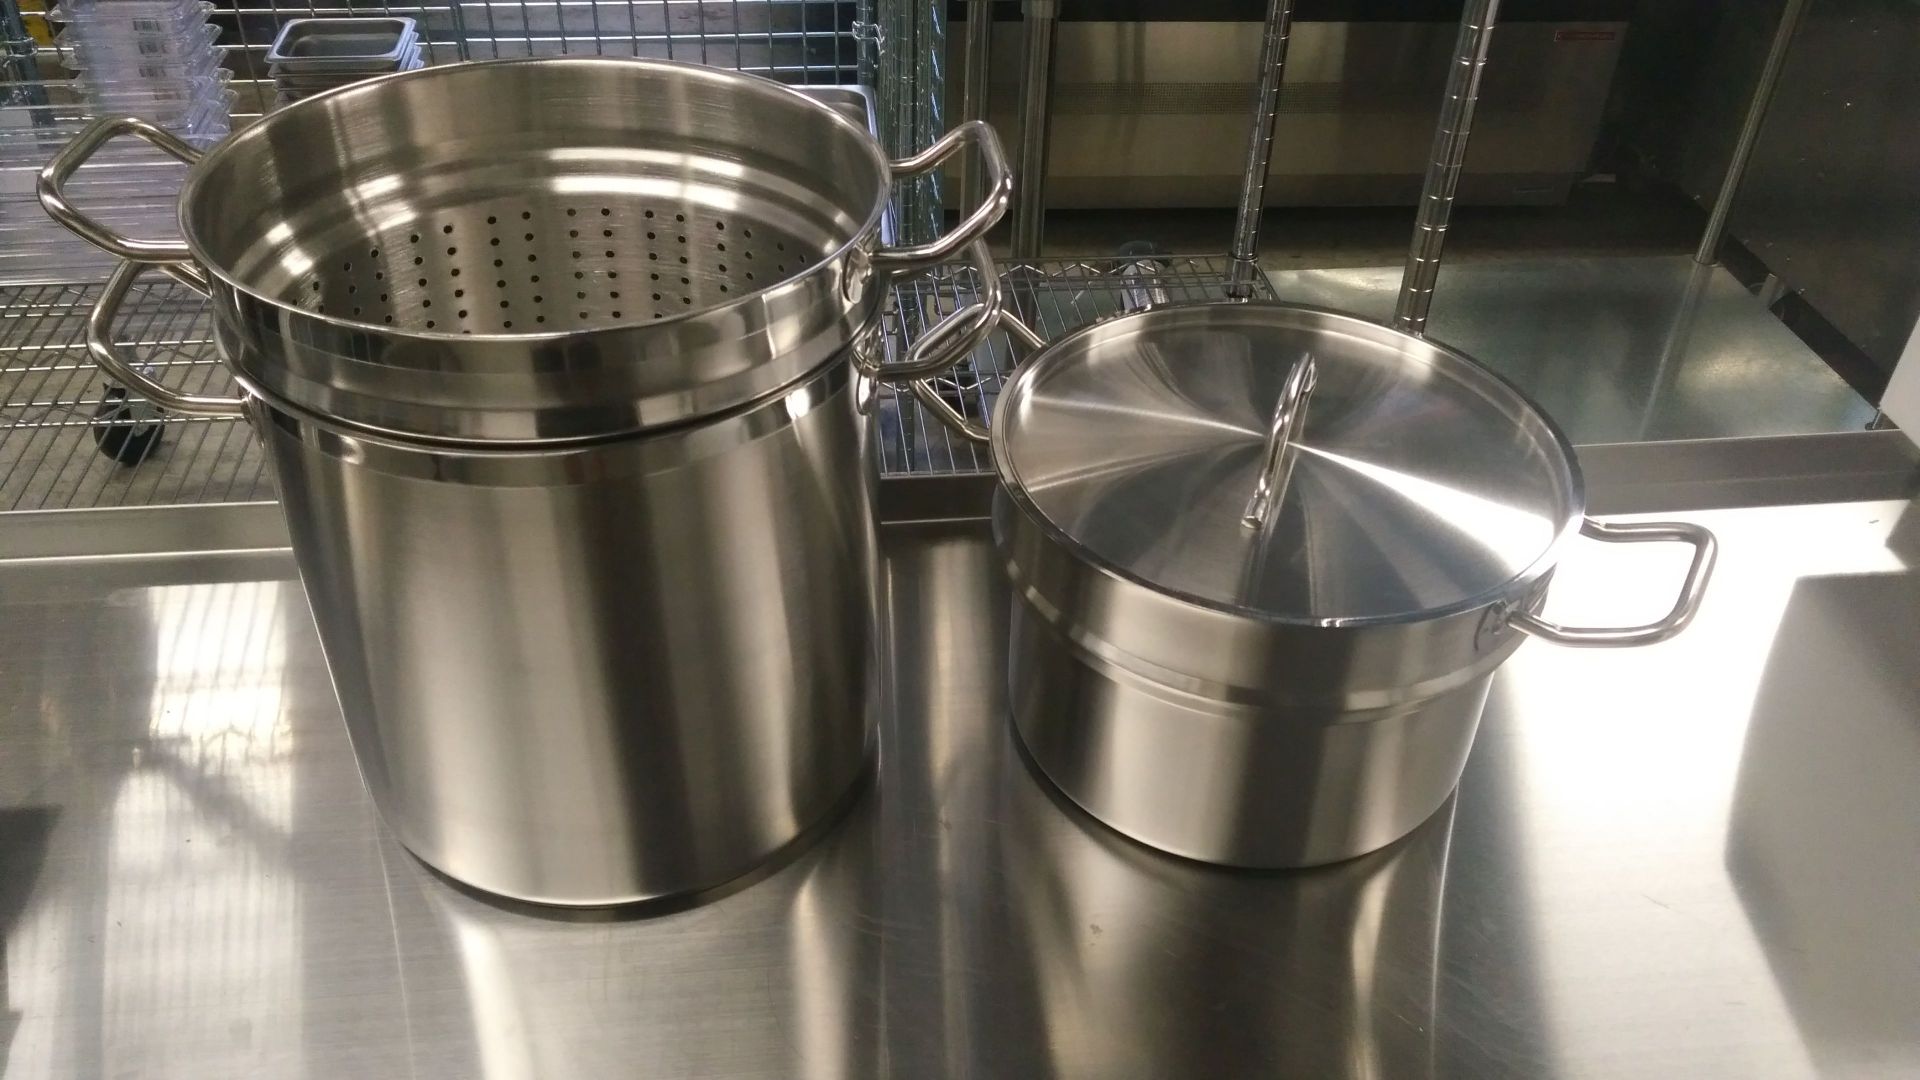 20qt Heavy Duty Stainless Stock Pot with Steamer Basket and Double Boiler - Image 5 of 6